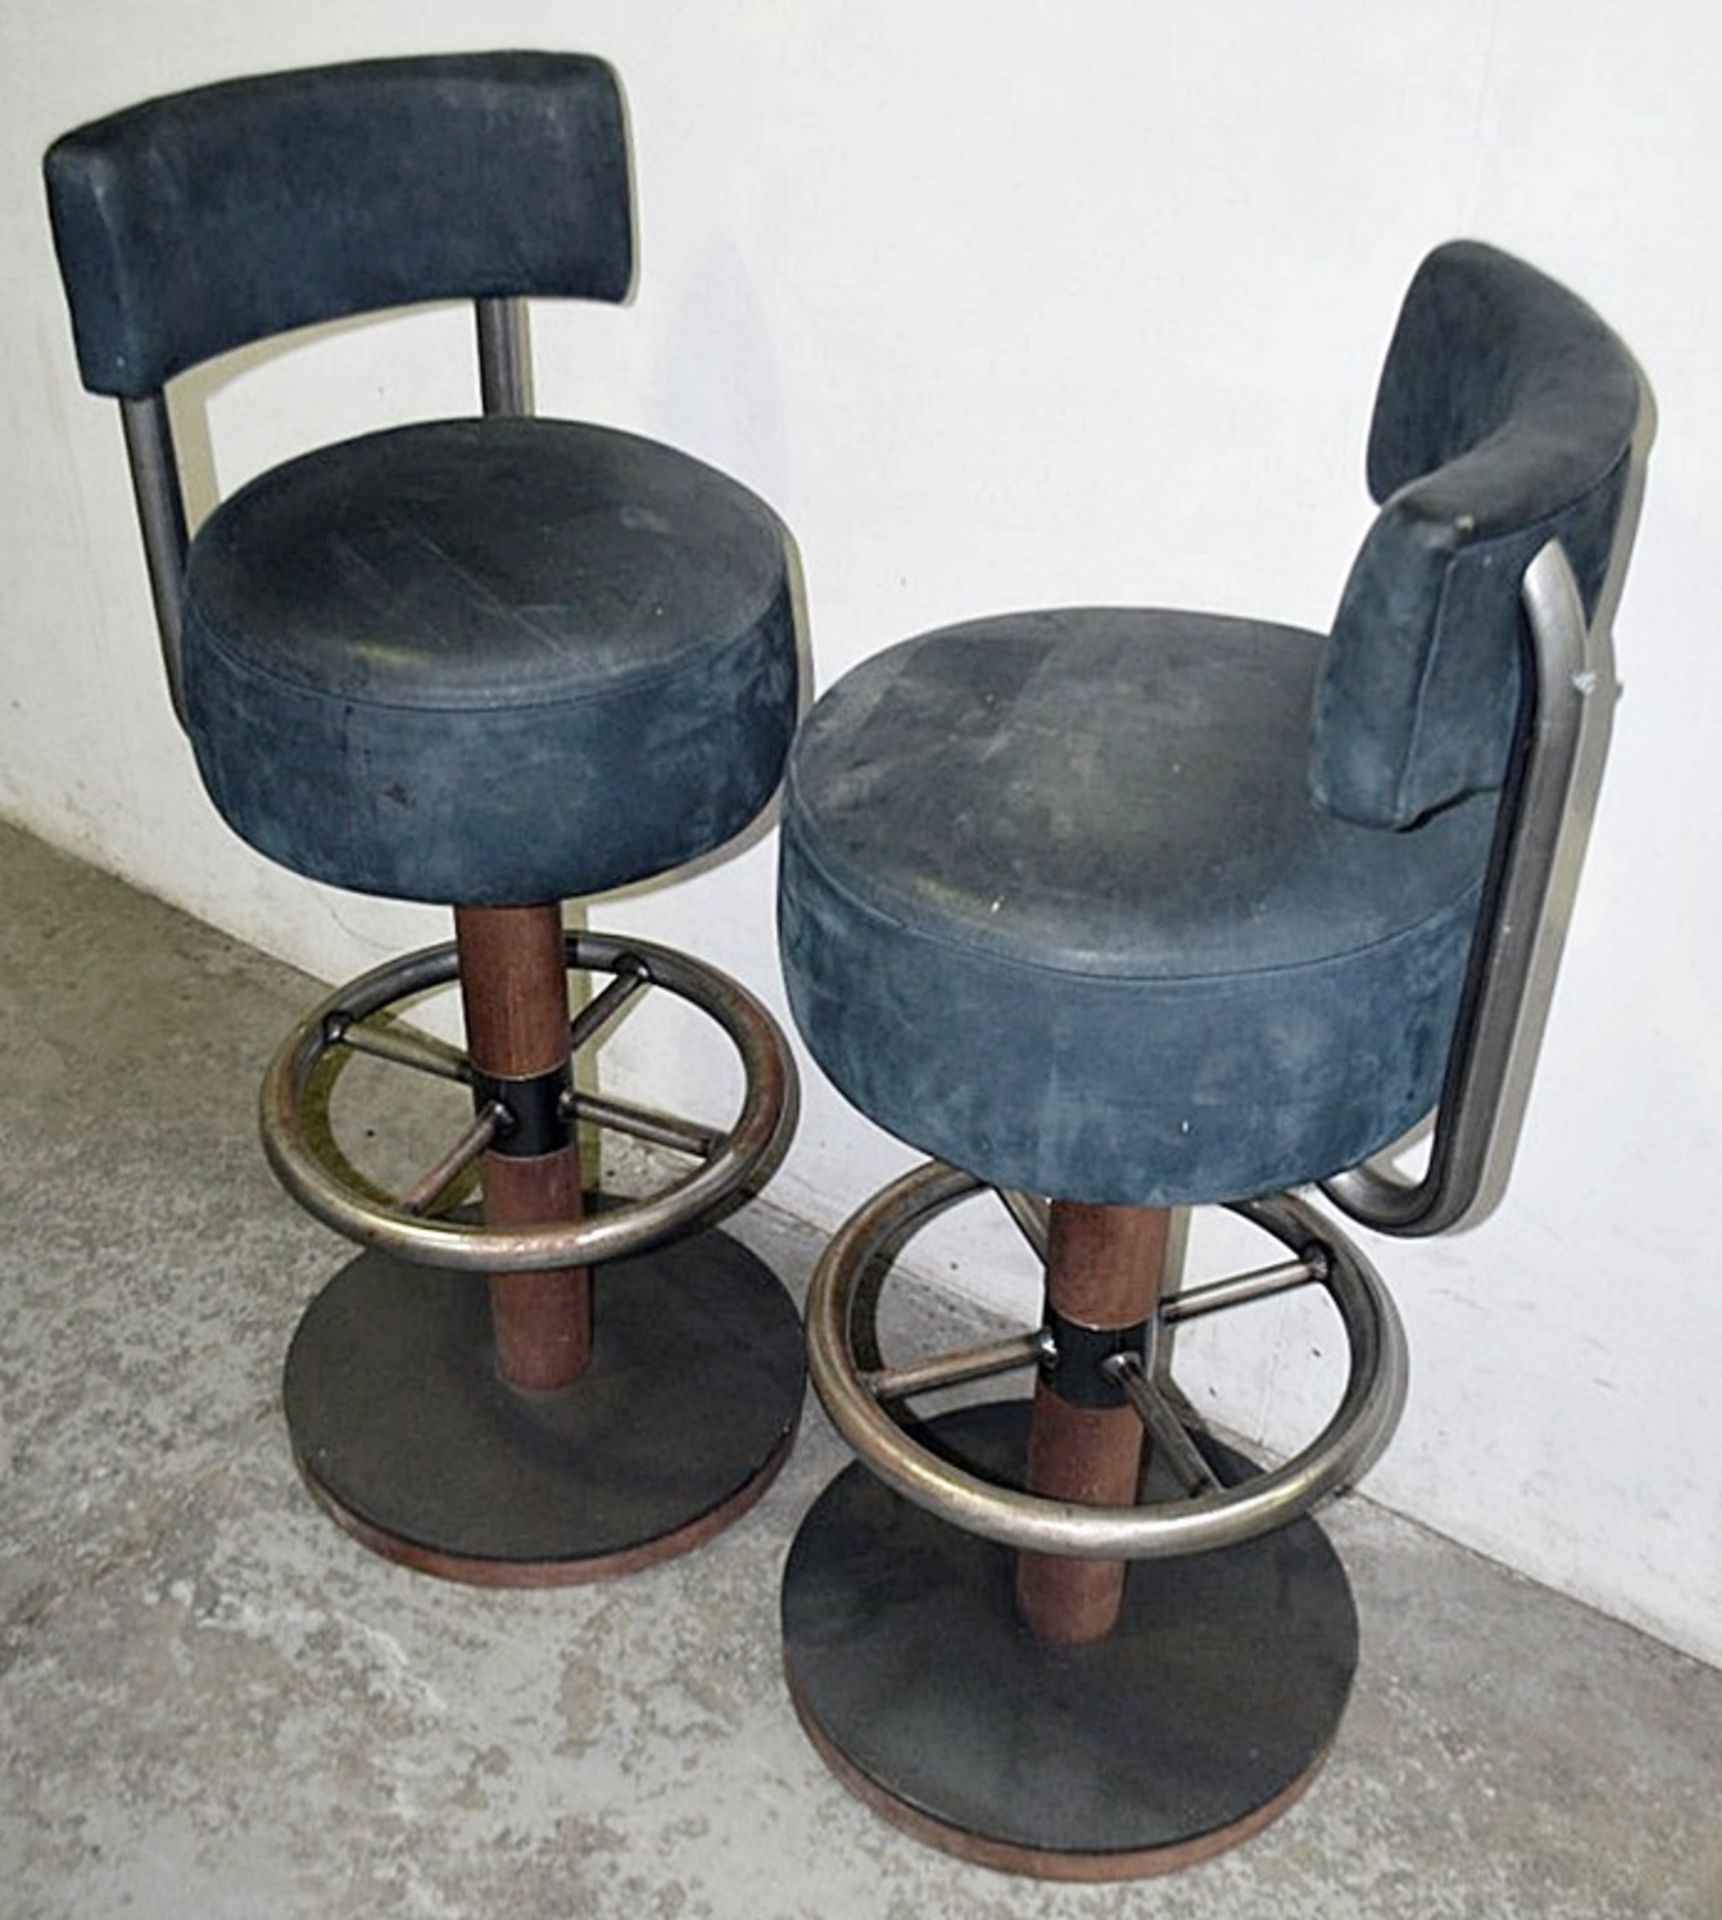 2 x Commercial Industrial-Style Hand-Built Stools With Tough Leather Upholstery And Circular